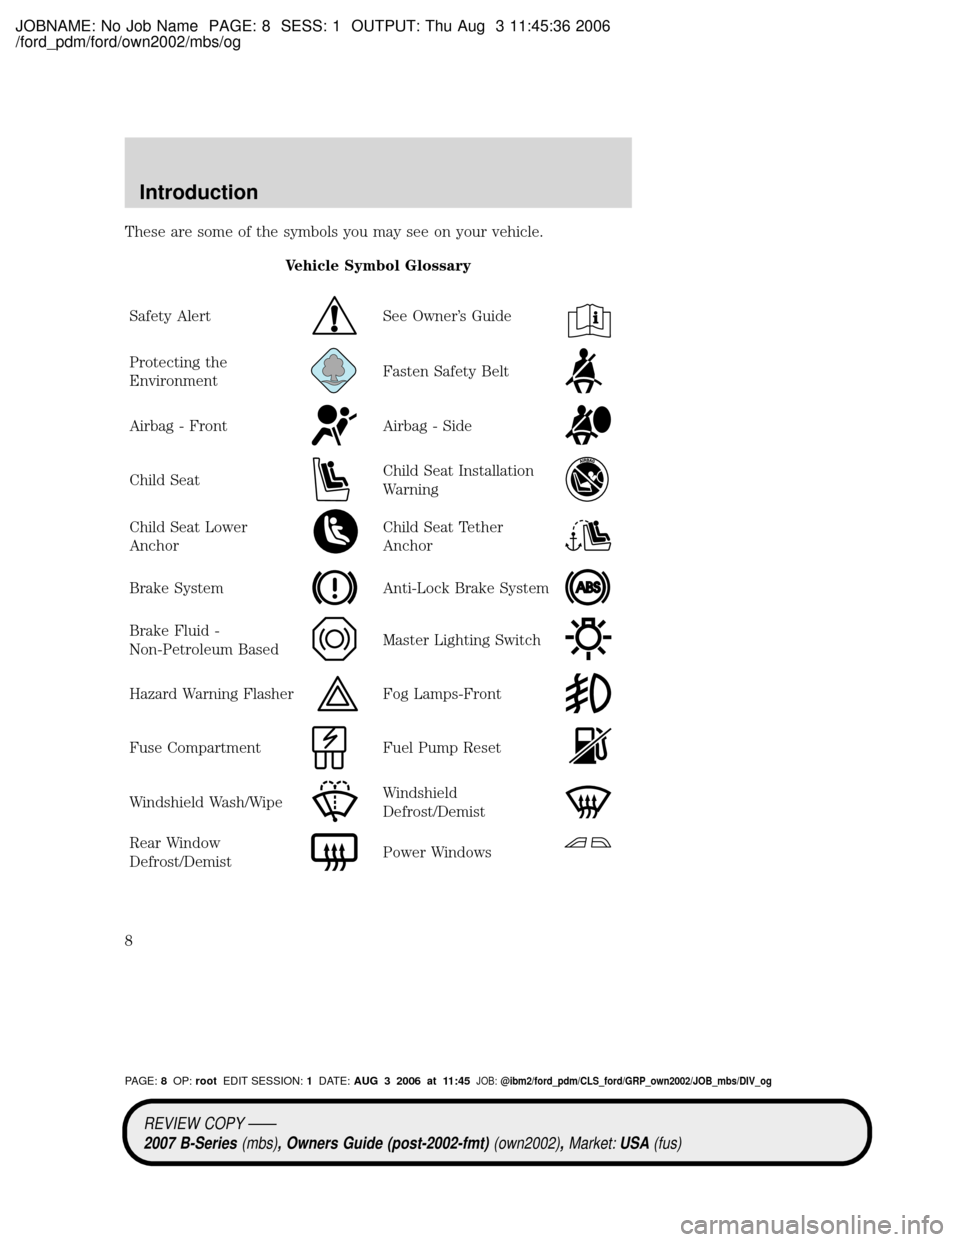 MAZDA MODEL B2300 TRUCK 2007  Owners Manual (in English) JOBNAME: No Job Name PAGE: 8 SESS: 1 OUTPUT: Thu Aug 3 11:45:36 2006
/ford_pdm/ford/own2002/mbs/og
These are some of the symbols you may see on your vehicle.
Vehicle Symbol Glossary
Safety Alert
See O